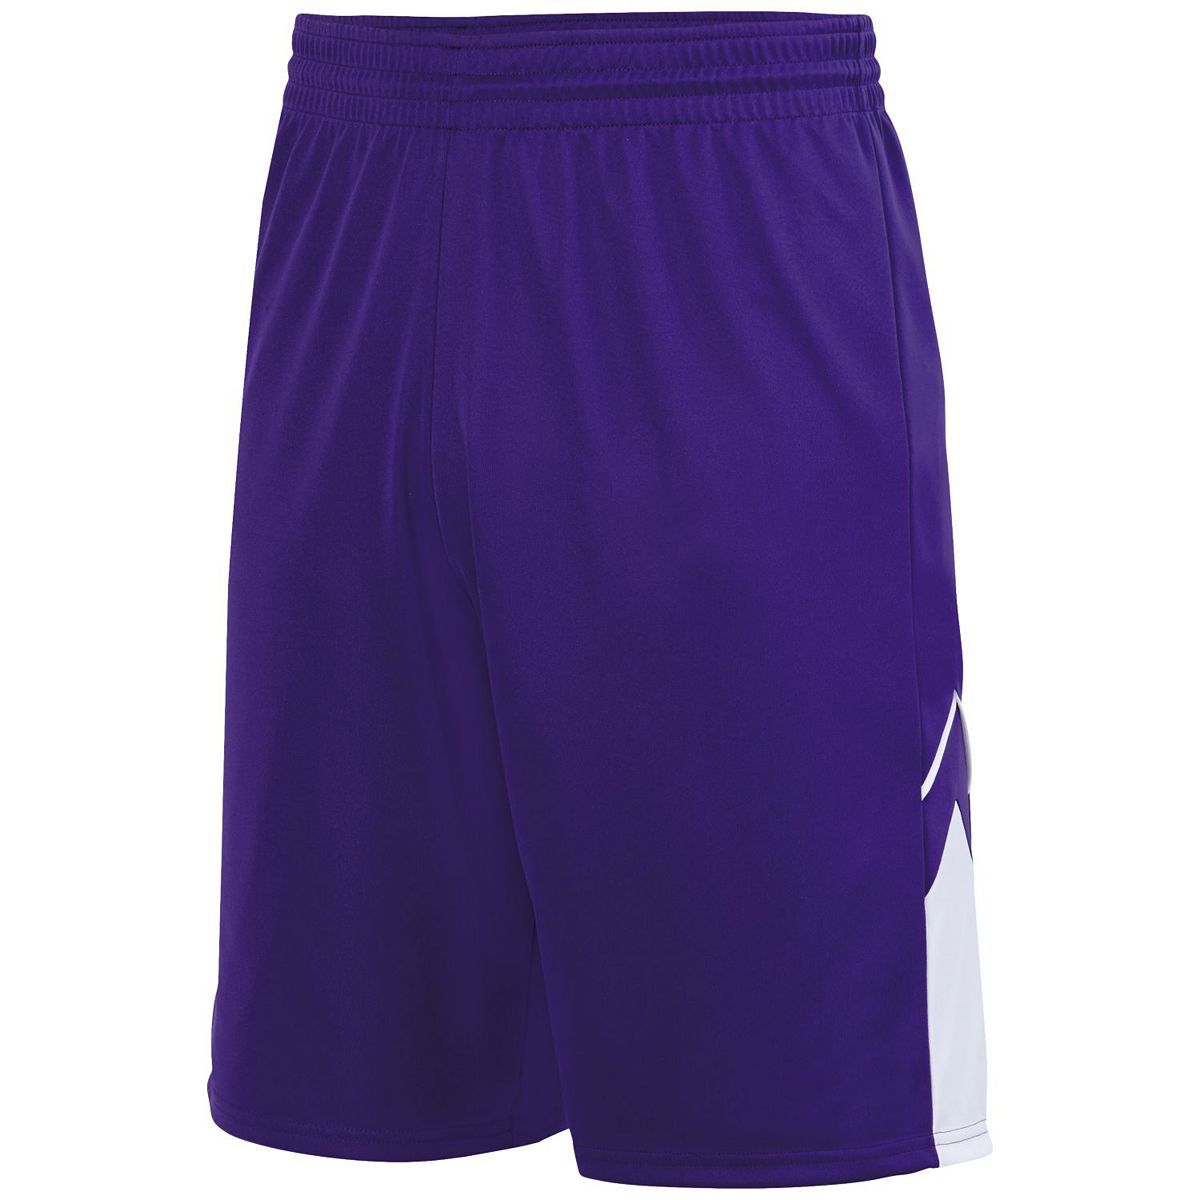 Augusta Sportswear Alley-Oop Reversible Shorts in Purple/White  -Part of the Adult, Adult-Shorts, Augusta-Products, Basketball, All-Sports, All-Sports-1 product lines at KanaleyCreations.com